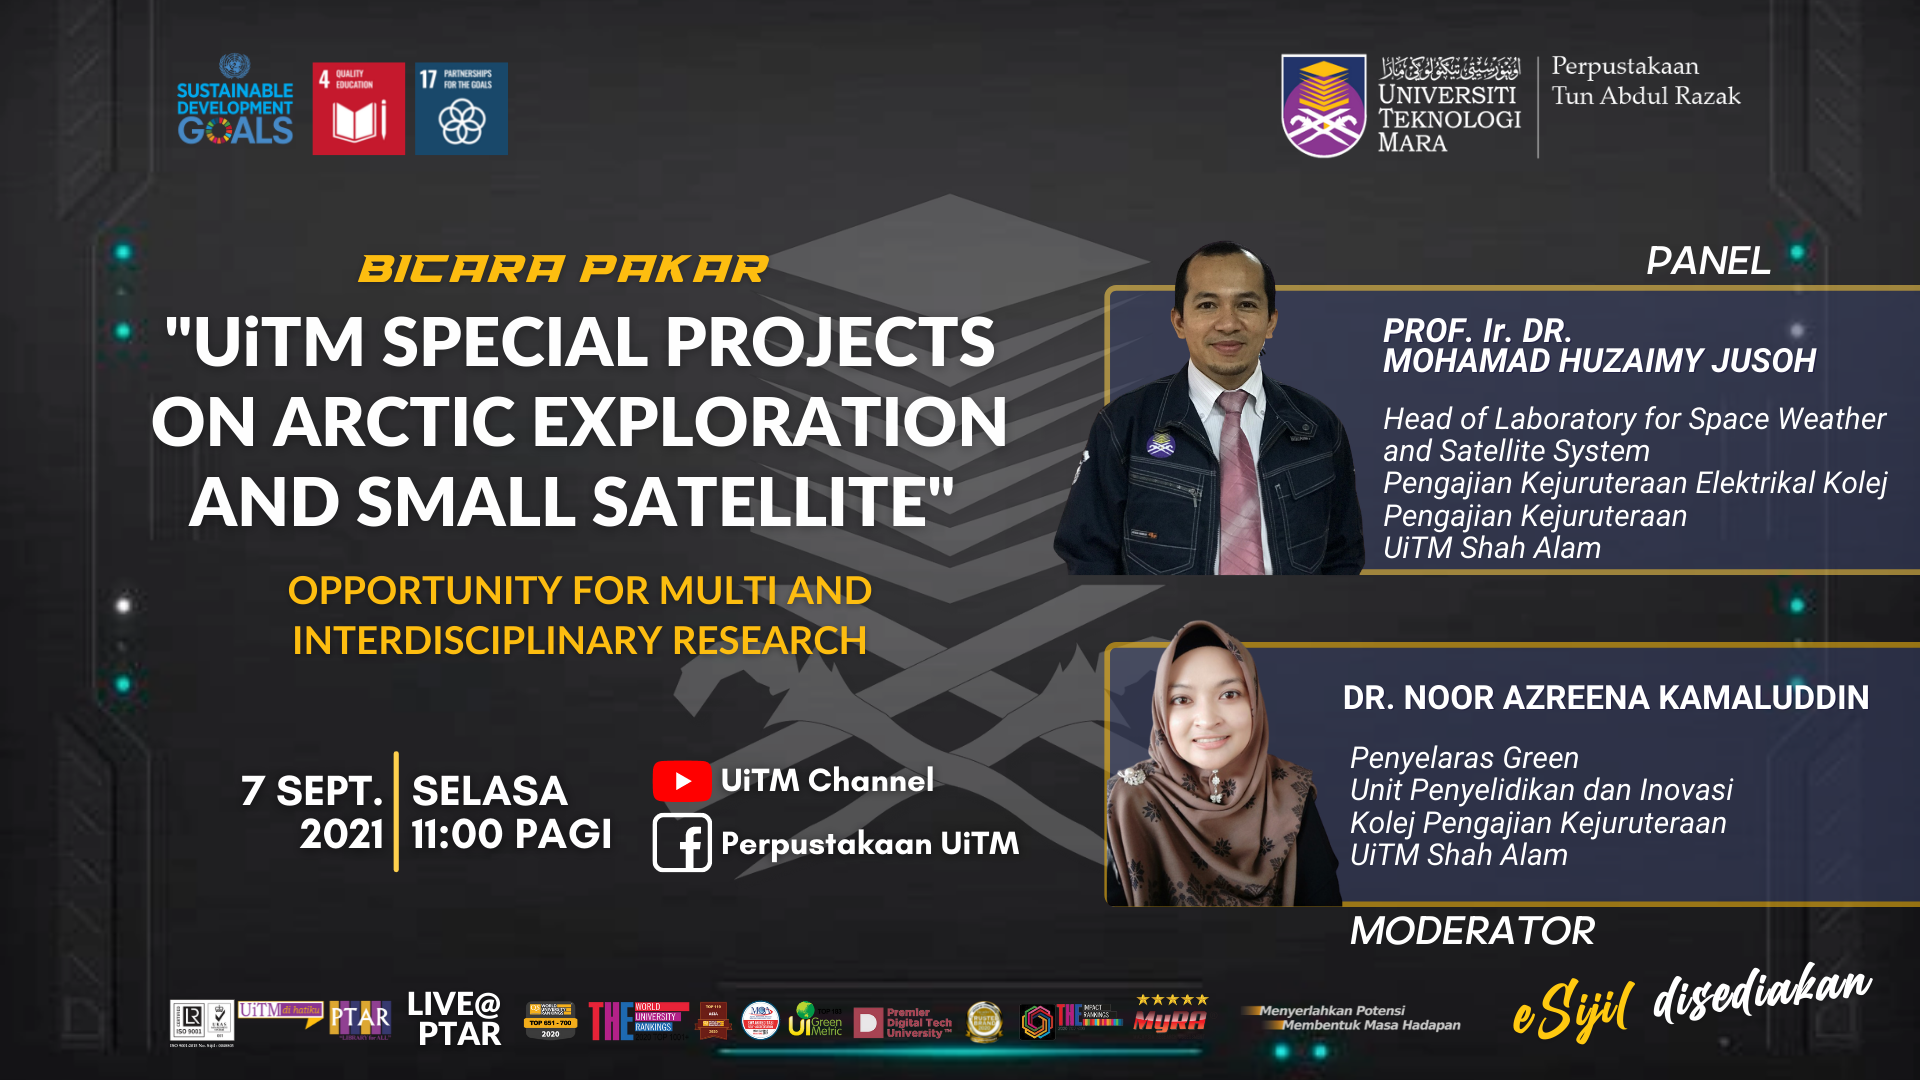 Bicara Pakar: UiTM Special Projects on Arctic Exploration and Small Satellite - Opportunity for Multi and Interdisciplinary Research